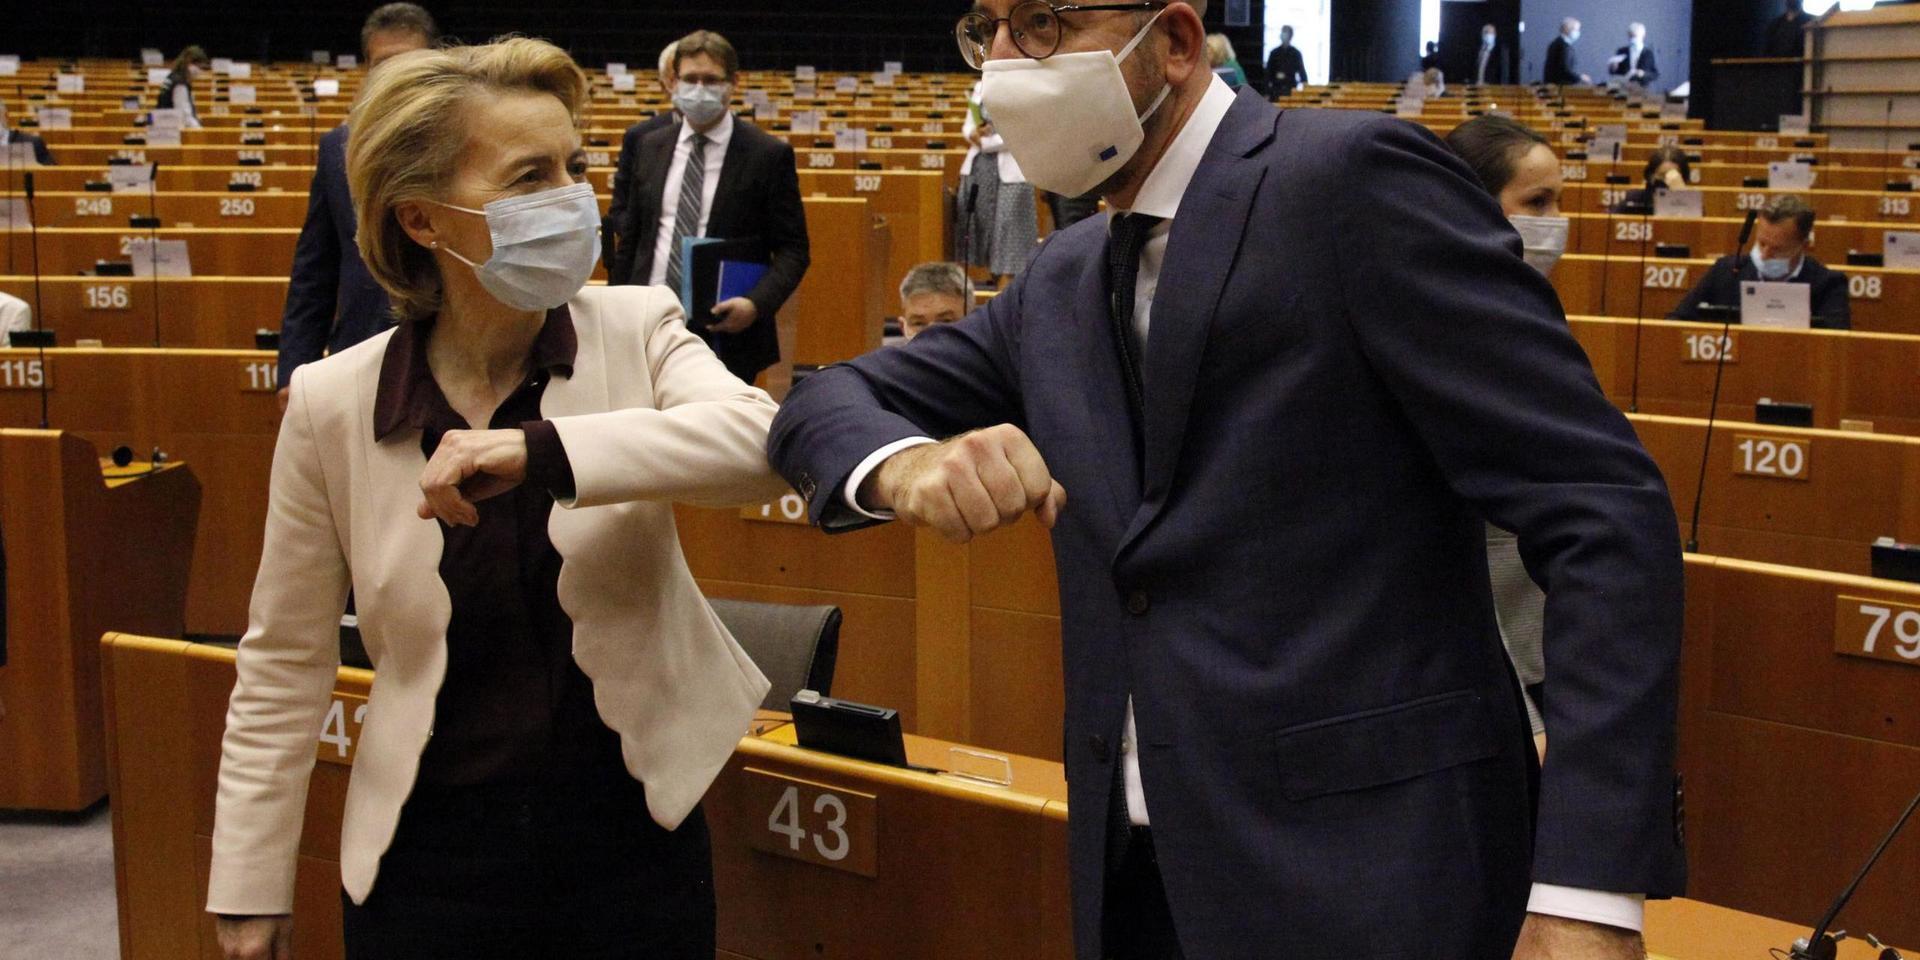 European Commission President Ursula von der Leyen, left, and European Council President Charles Michel bump elbows as they arrive at the main chamber of the European Parliament in Brussels, Thursday, July 23, 2020. European leaders took a historic step towards sharing financial burdens among the EU&apos;s 27 countries by agreeing to borrow and spend together to pull the economy out of the deep recession caused by the coronavirus outbreak (Francois Walschaerts, Pool Photo via AP)  FS105